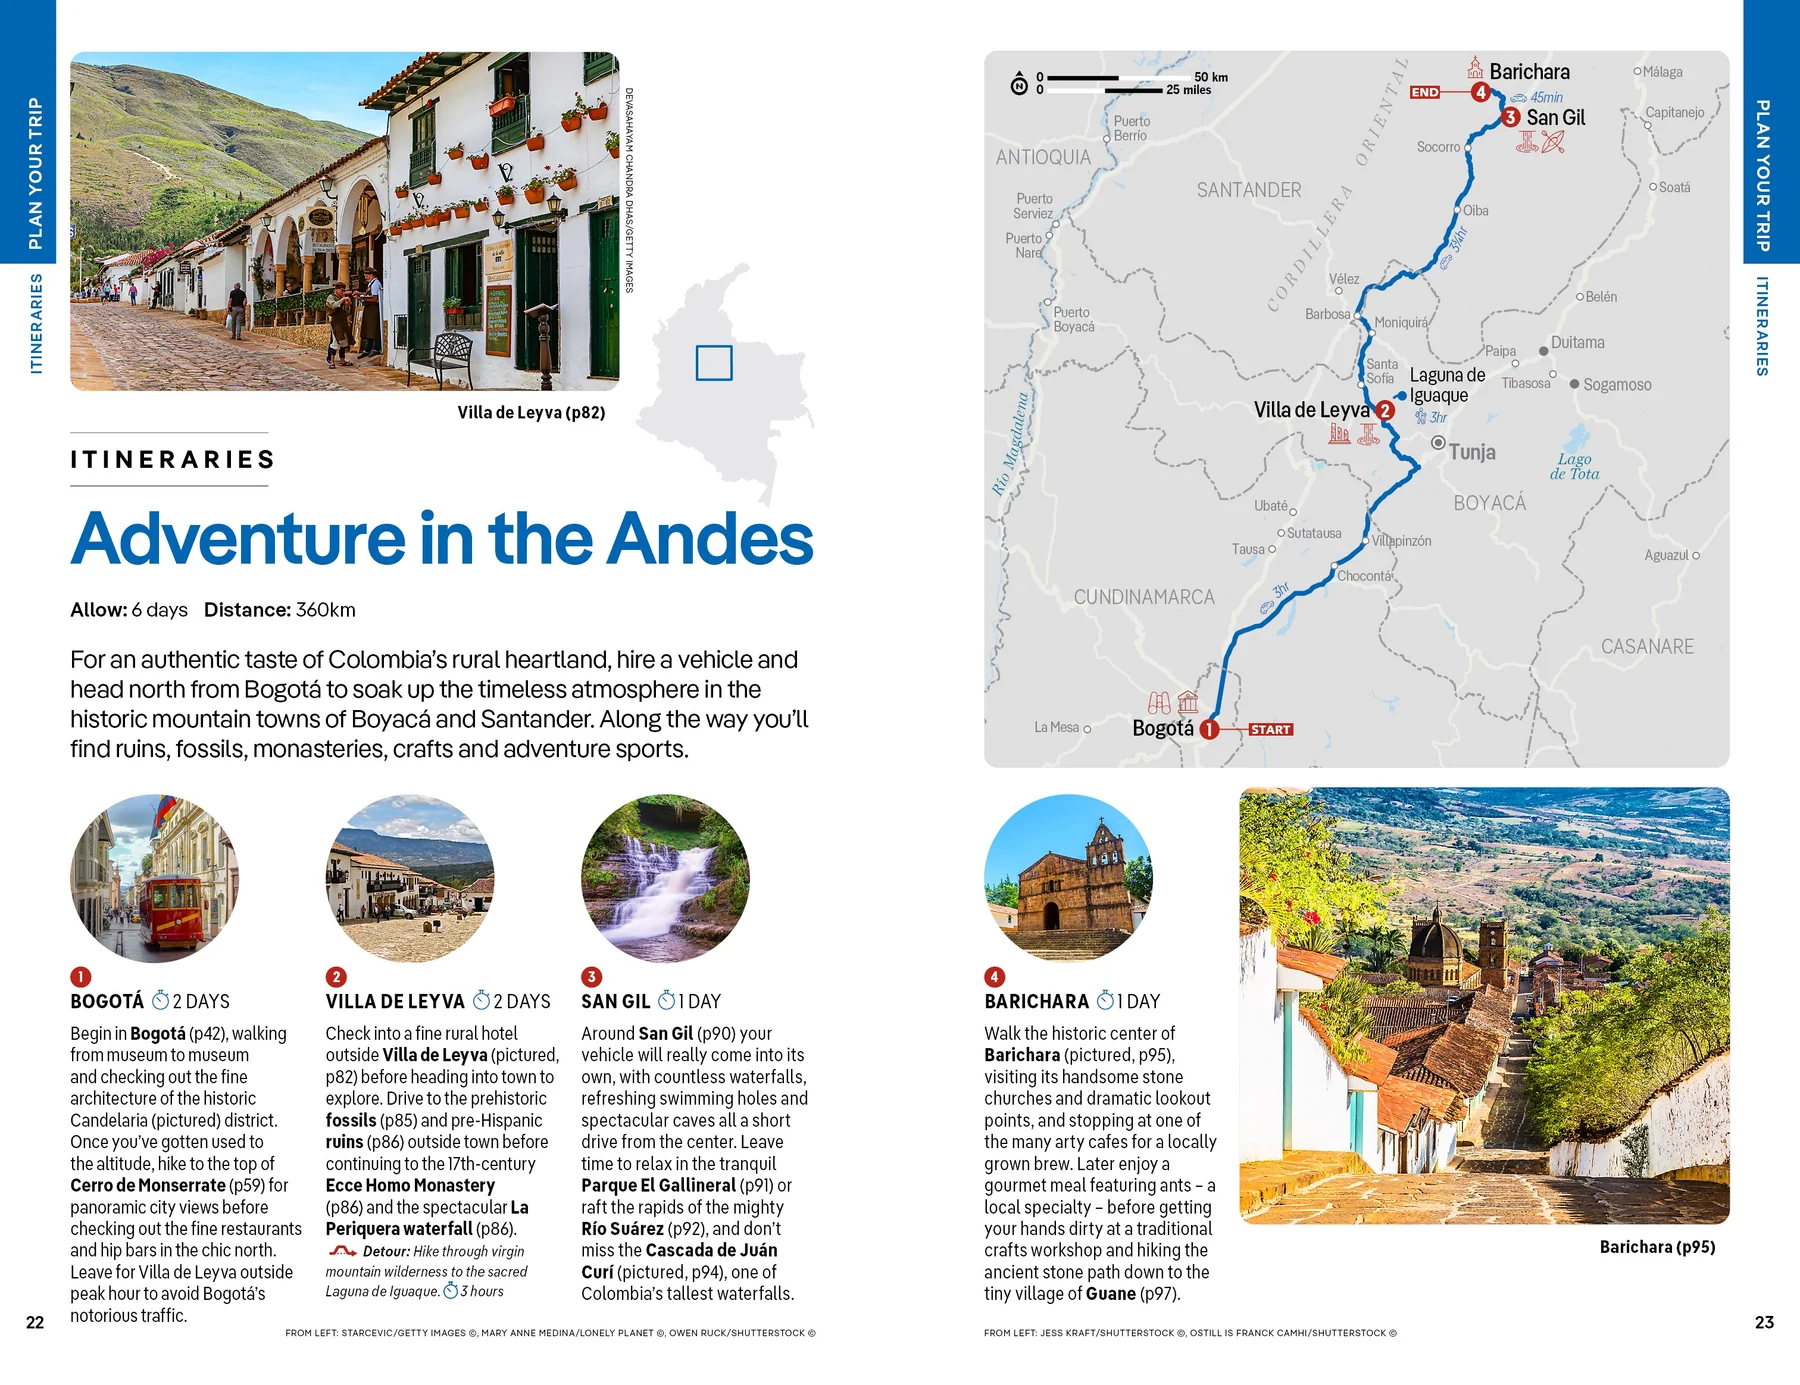 Colombia Lonely Planet